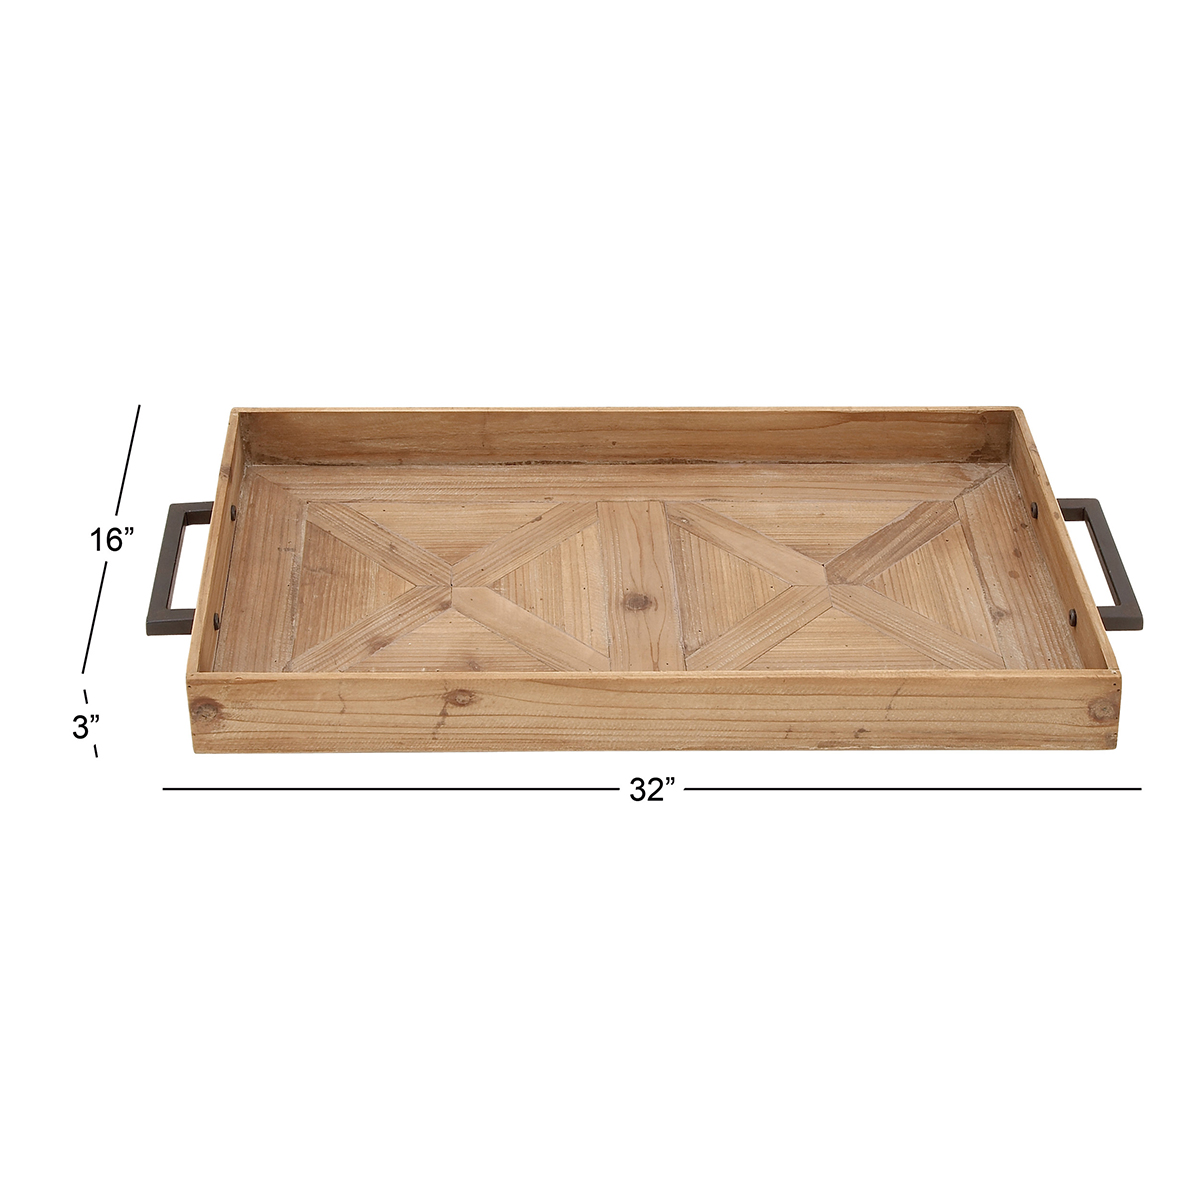 9th & Pike(R) Extra-Large Wooden Tray With Metal Handles